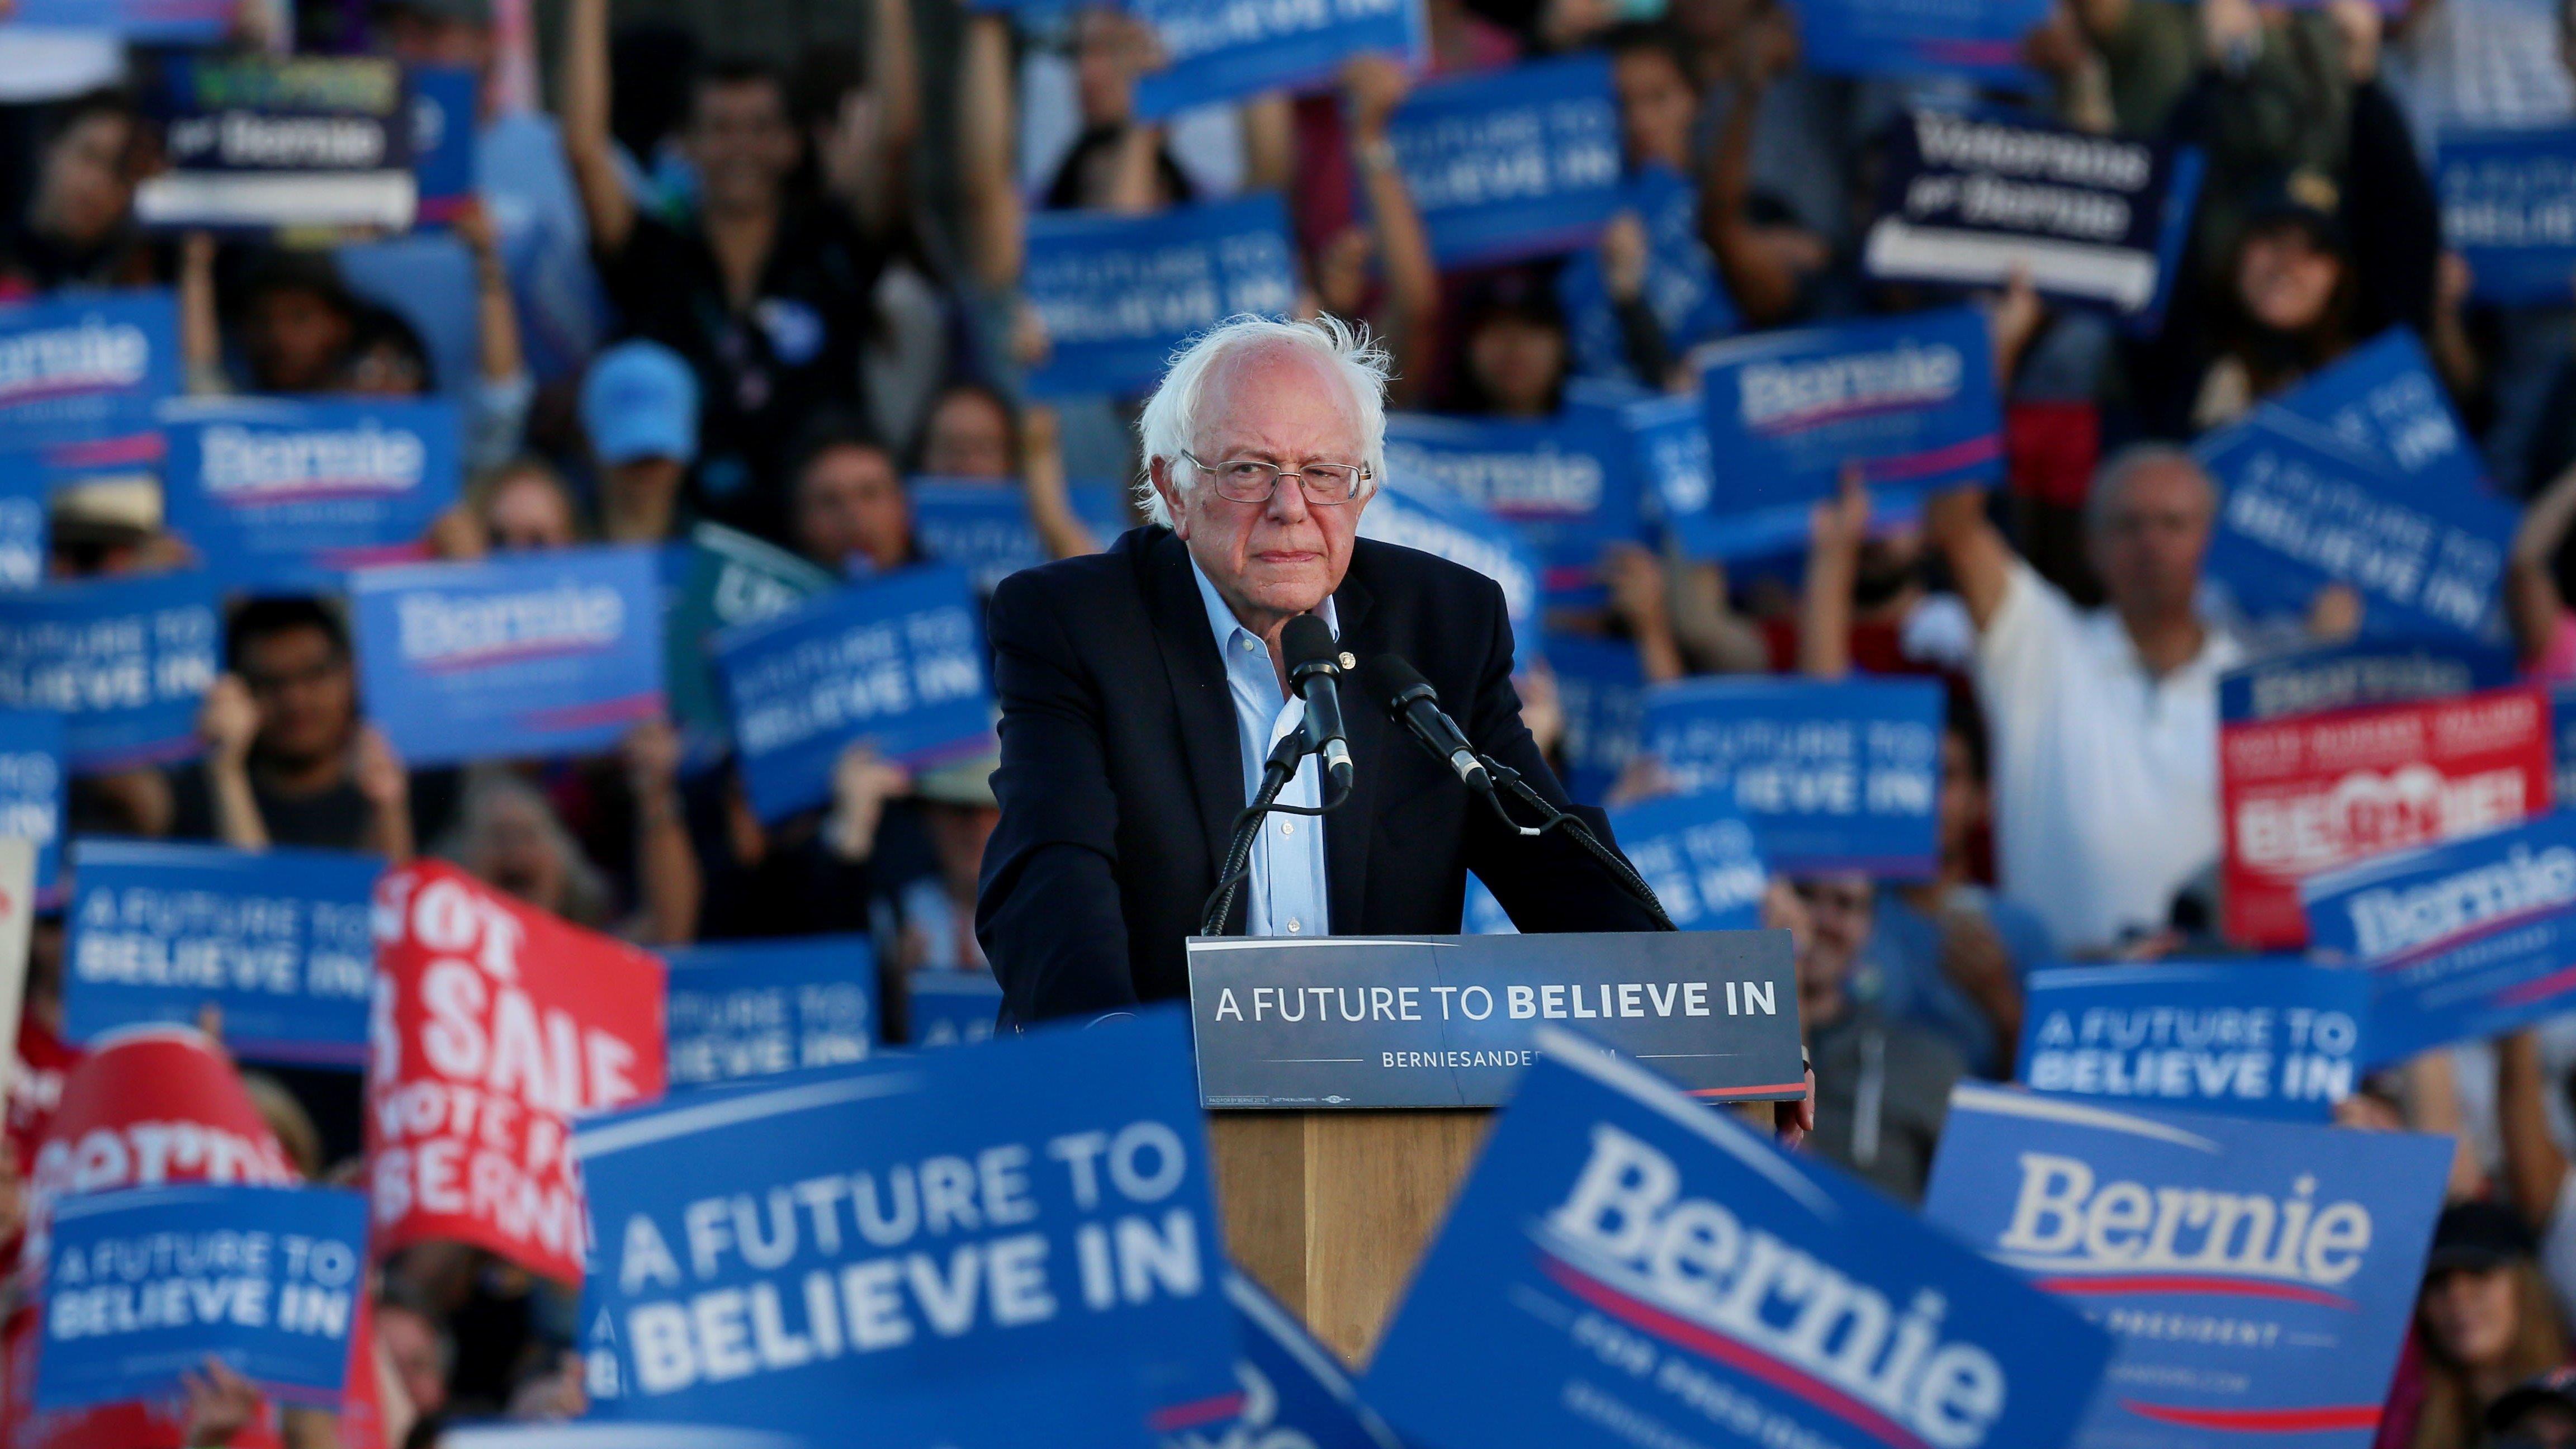 Report: Sanders camp divided over convention strategy